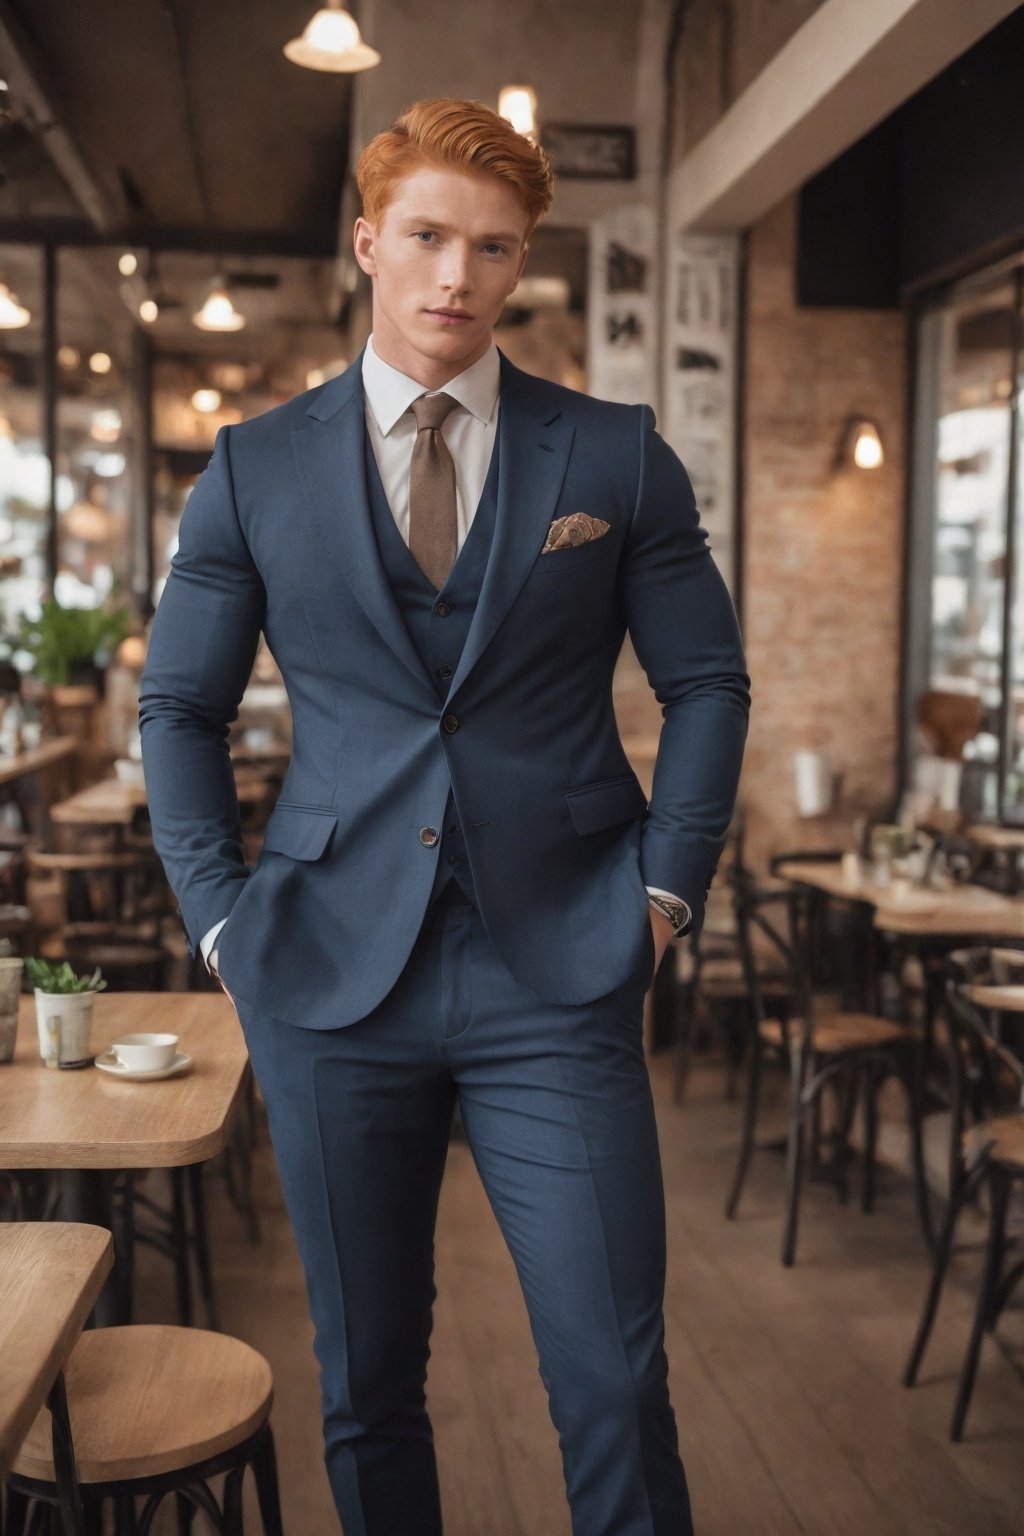 Realistic Photography, Handsome muscular man, cafe, full_body, ginger hair, nice suit